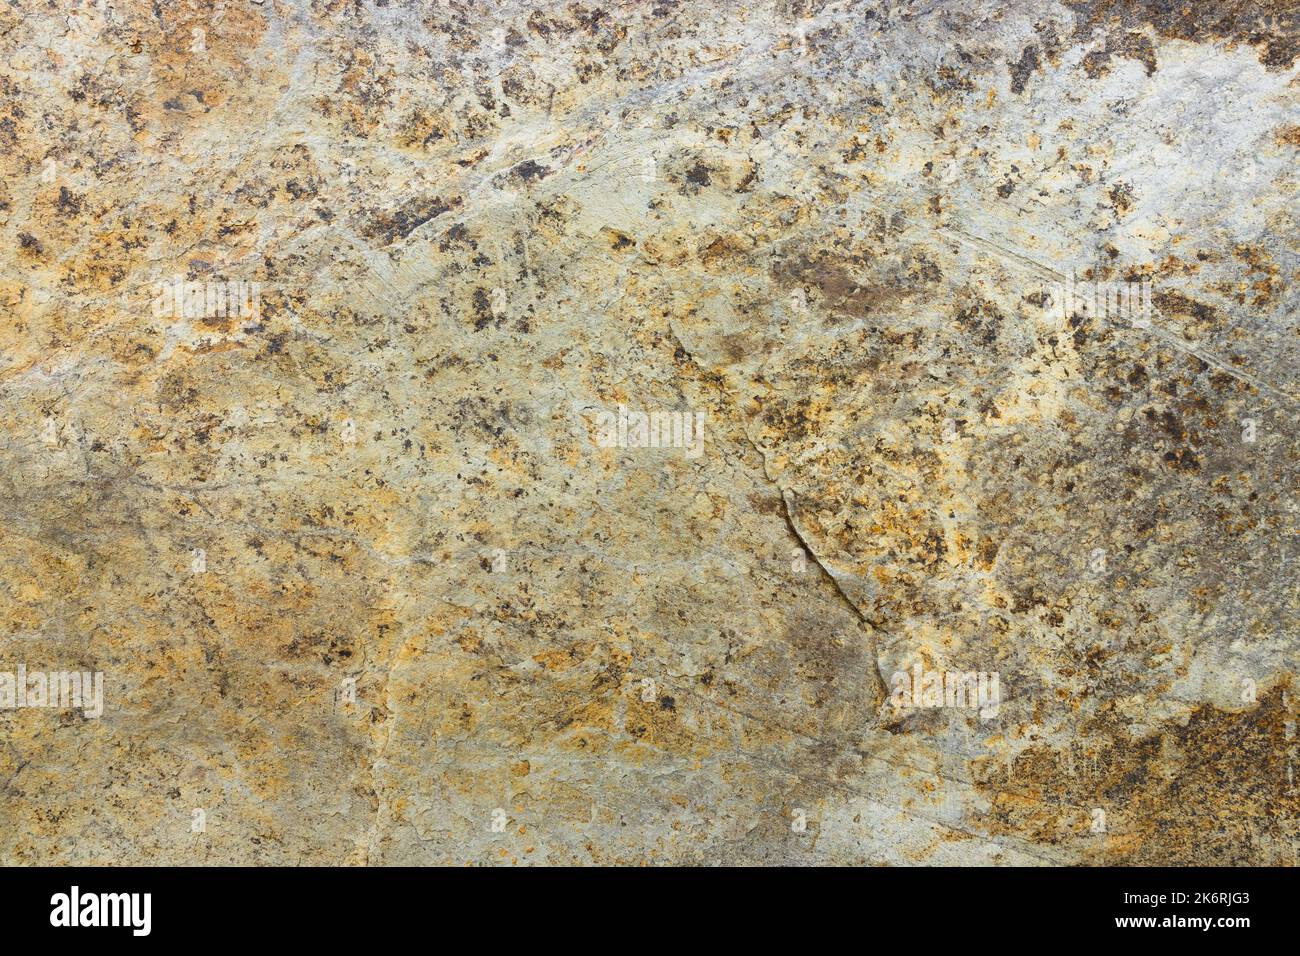 Marble stone slab background with natural pattern texture Stock Photo